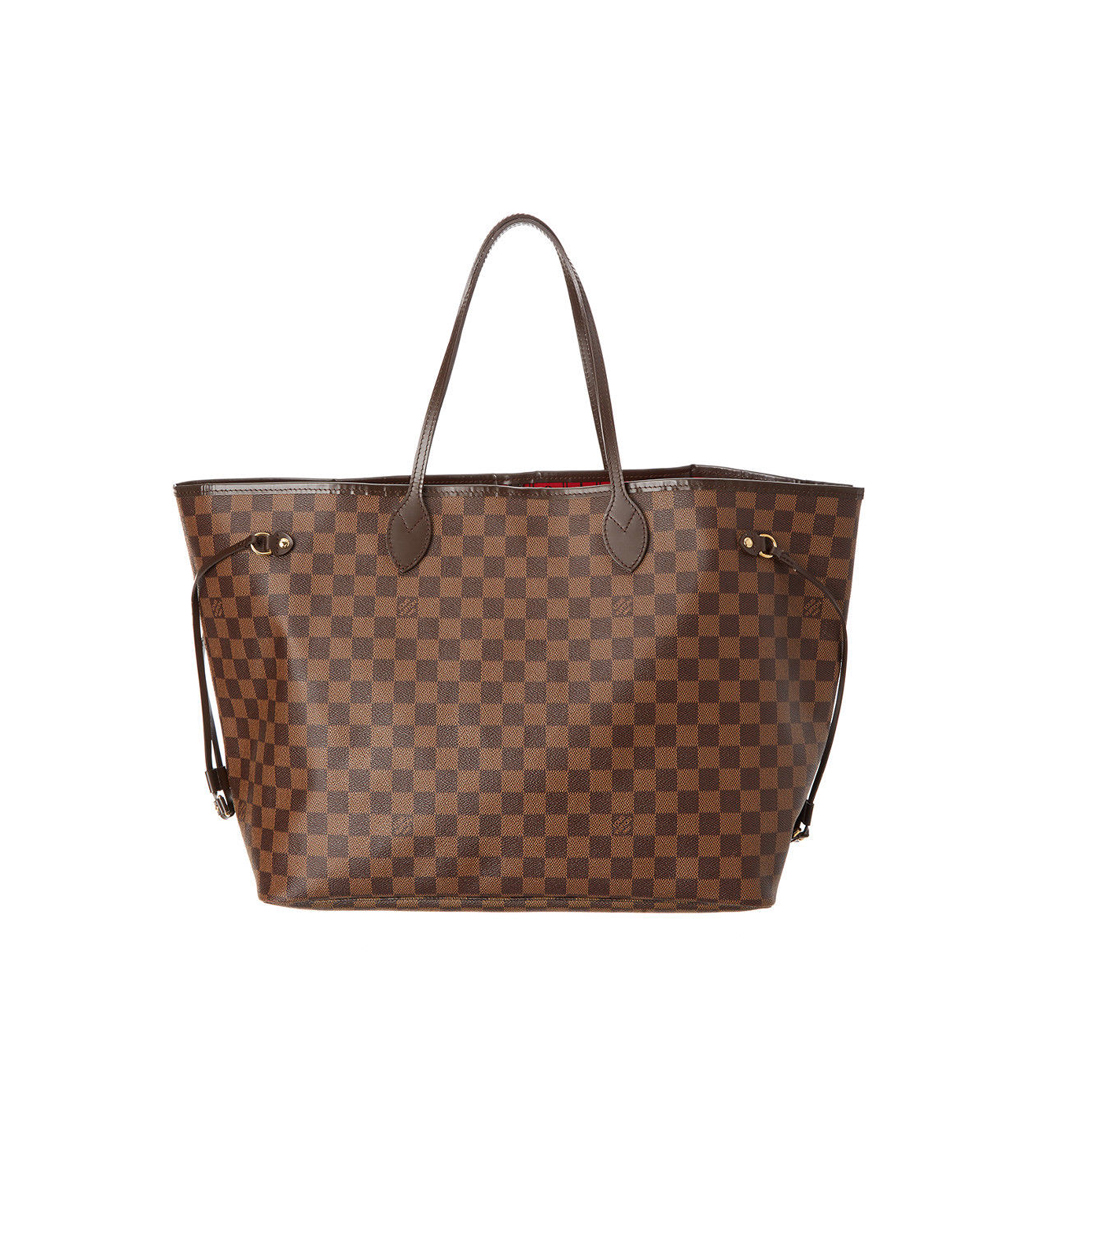 This Louis Vuitton Bag Is Trending—and There Are Over 1000 Options on eBay – luxreagent27401